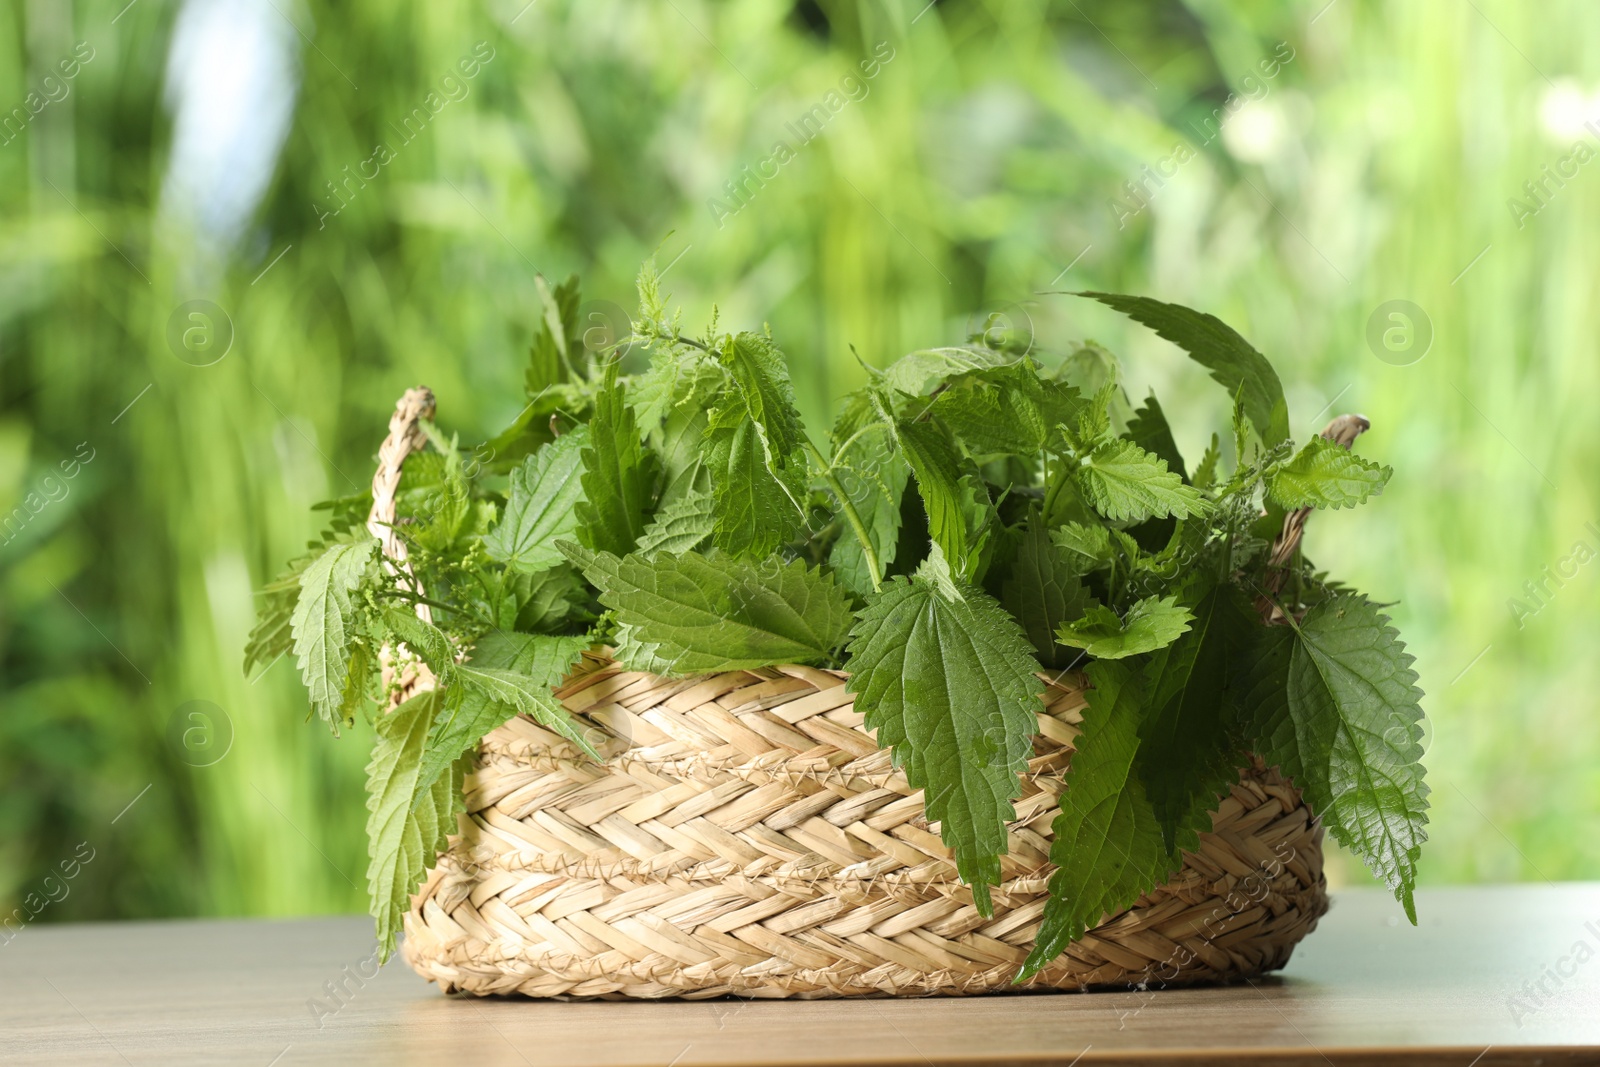 Photo of Fresh stinging nettle leaves in wicker basket outdoors